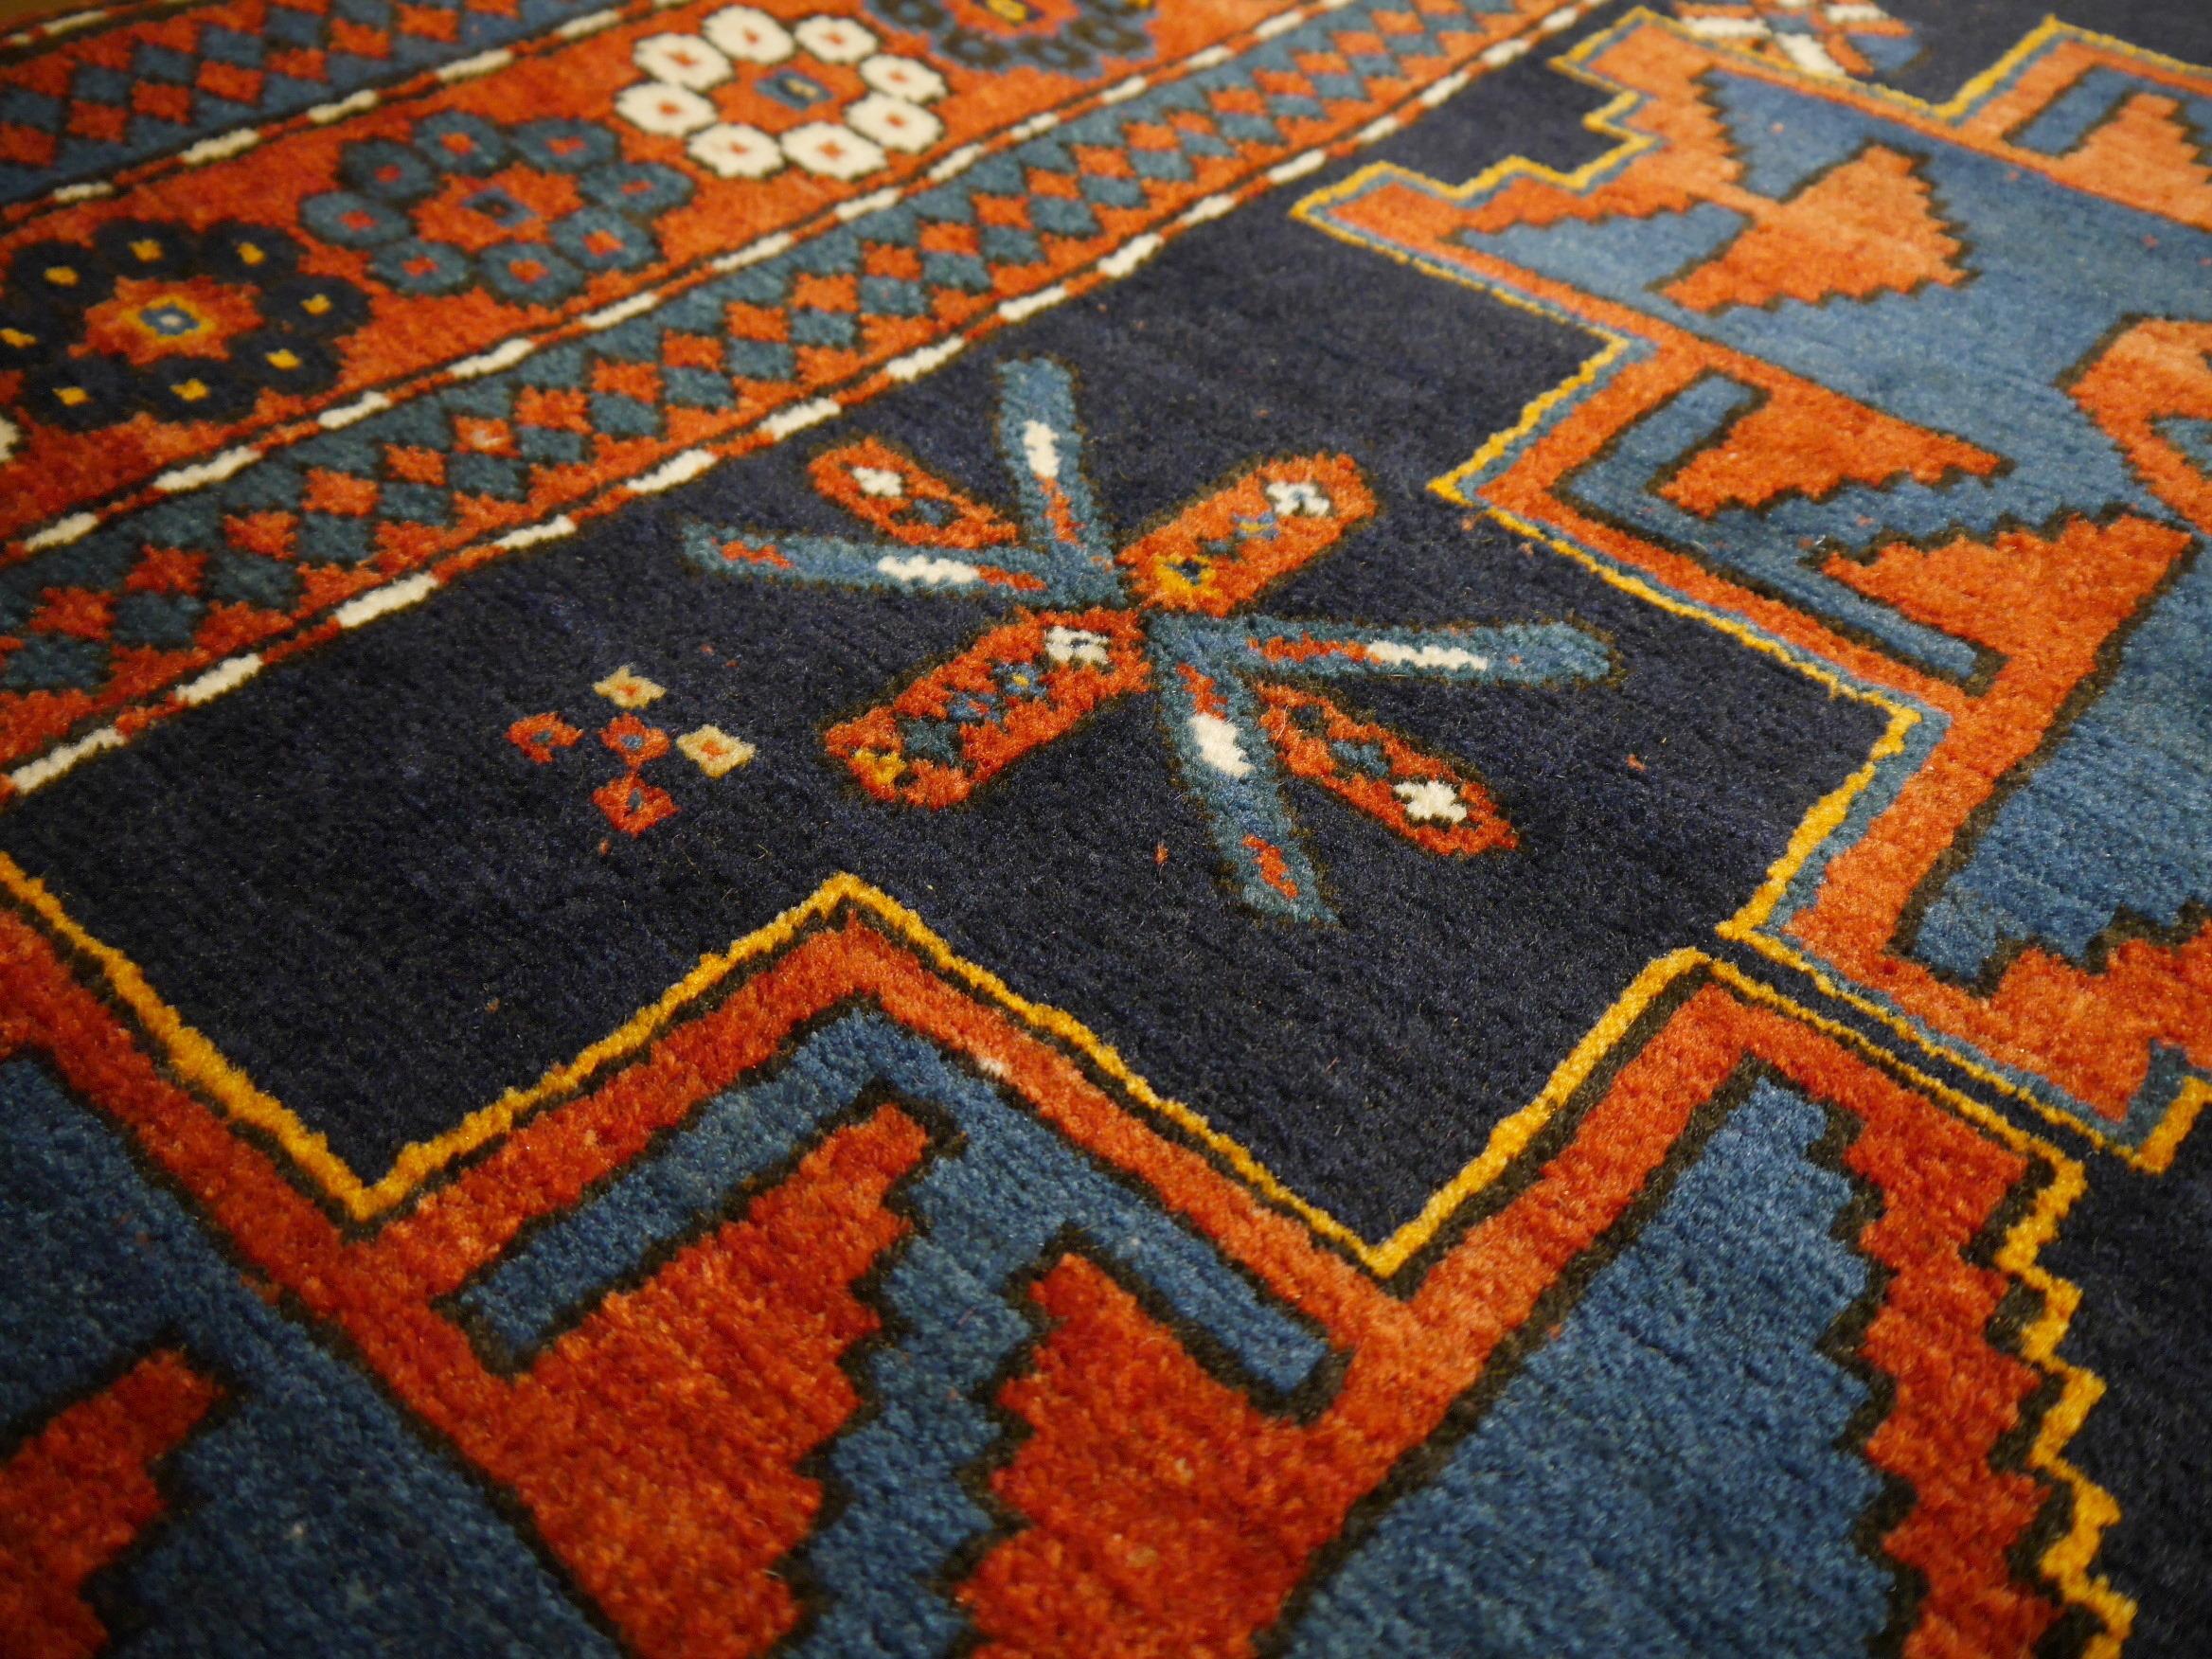 Antique Kazak Lesghi rug, hand knotted early 20th Century

A beautiful Kazak rug from Azerbaijan. Best quality wool and vegetable dyes. 
 
• Beautiful antique Kazak rug
• All handmade
• Pile pure wool
• Traditional Lesghi design
• Condition: Very